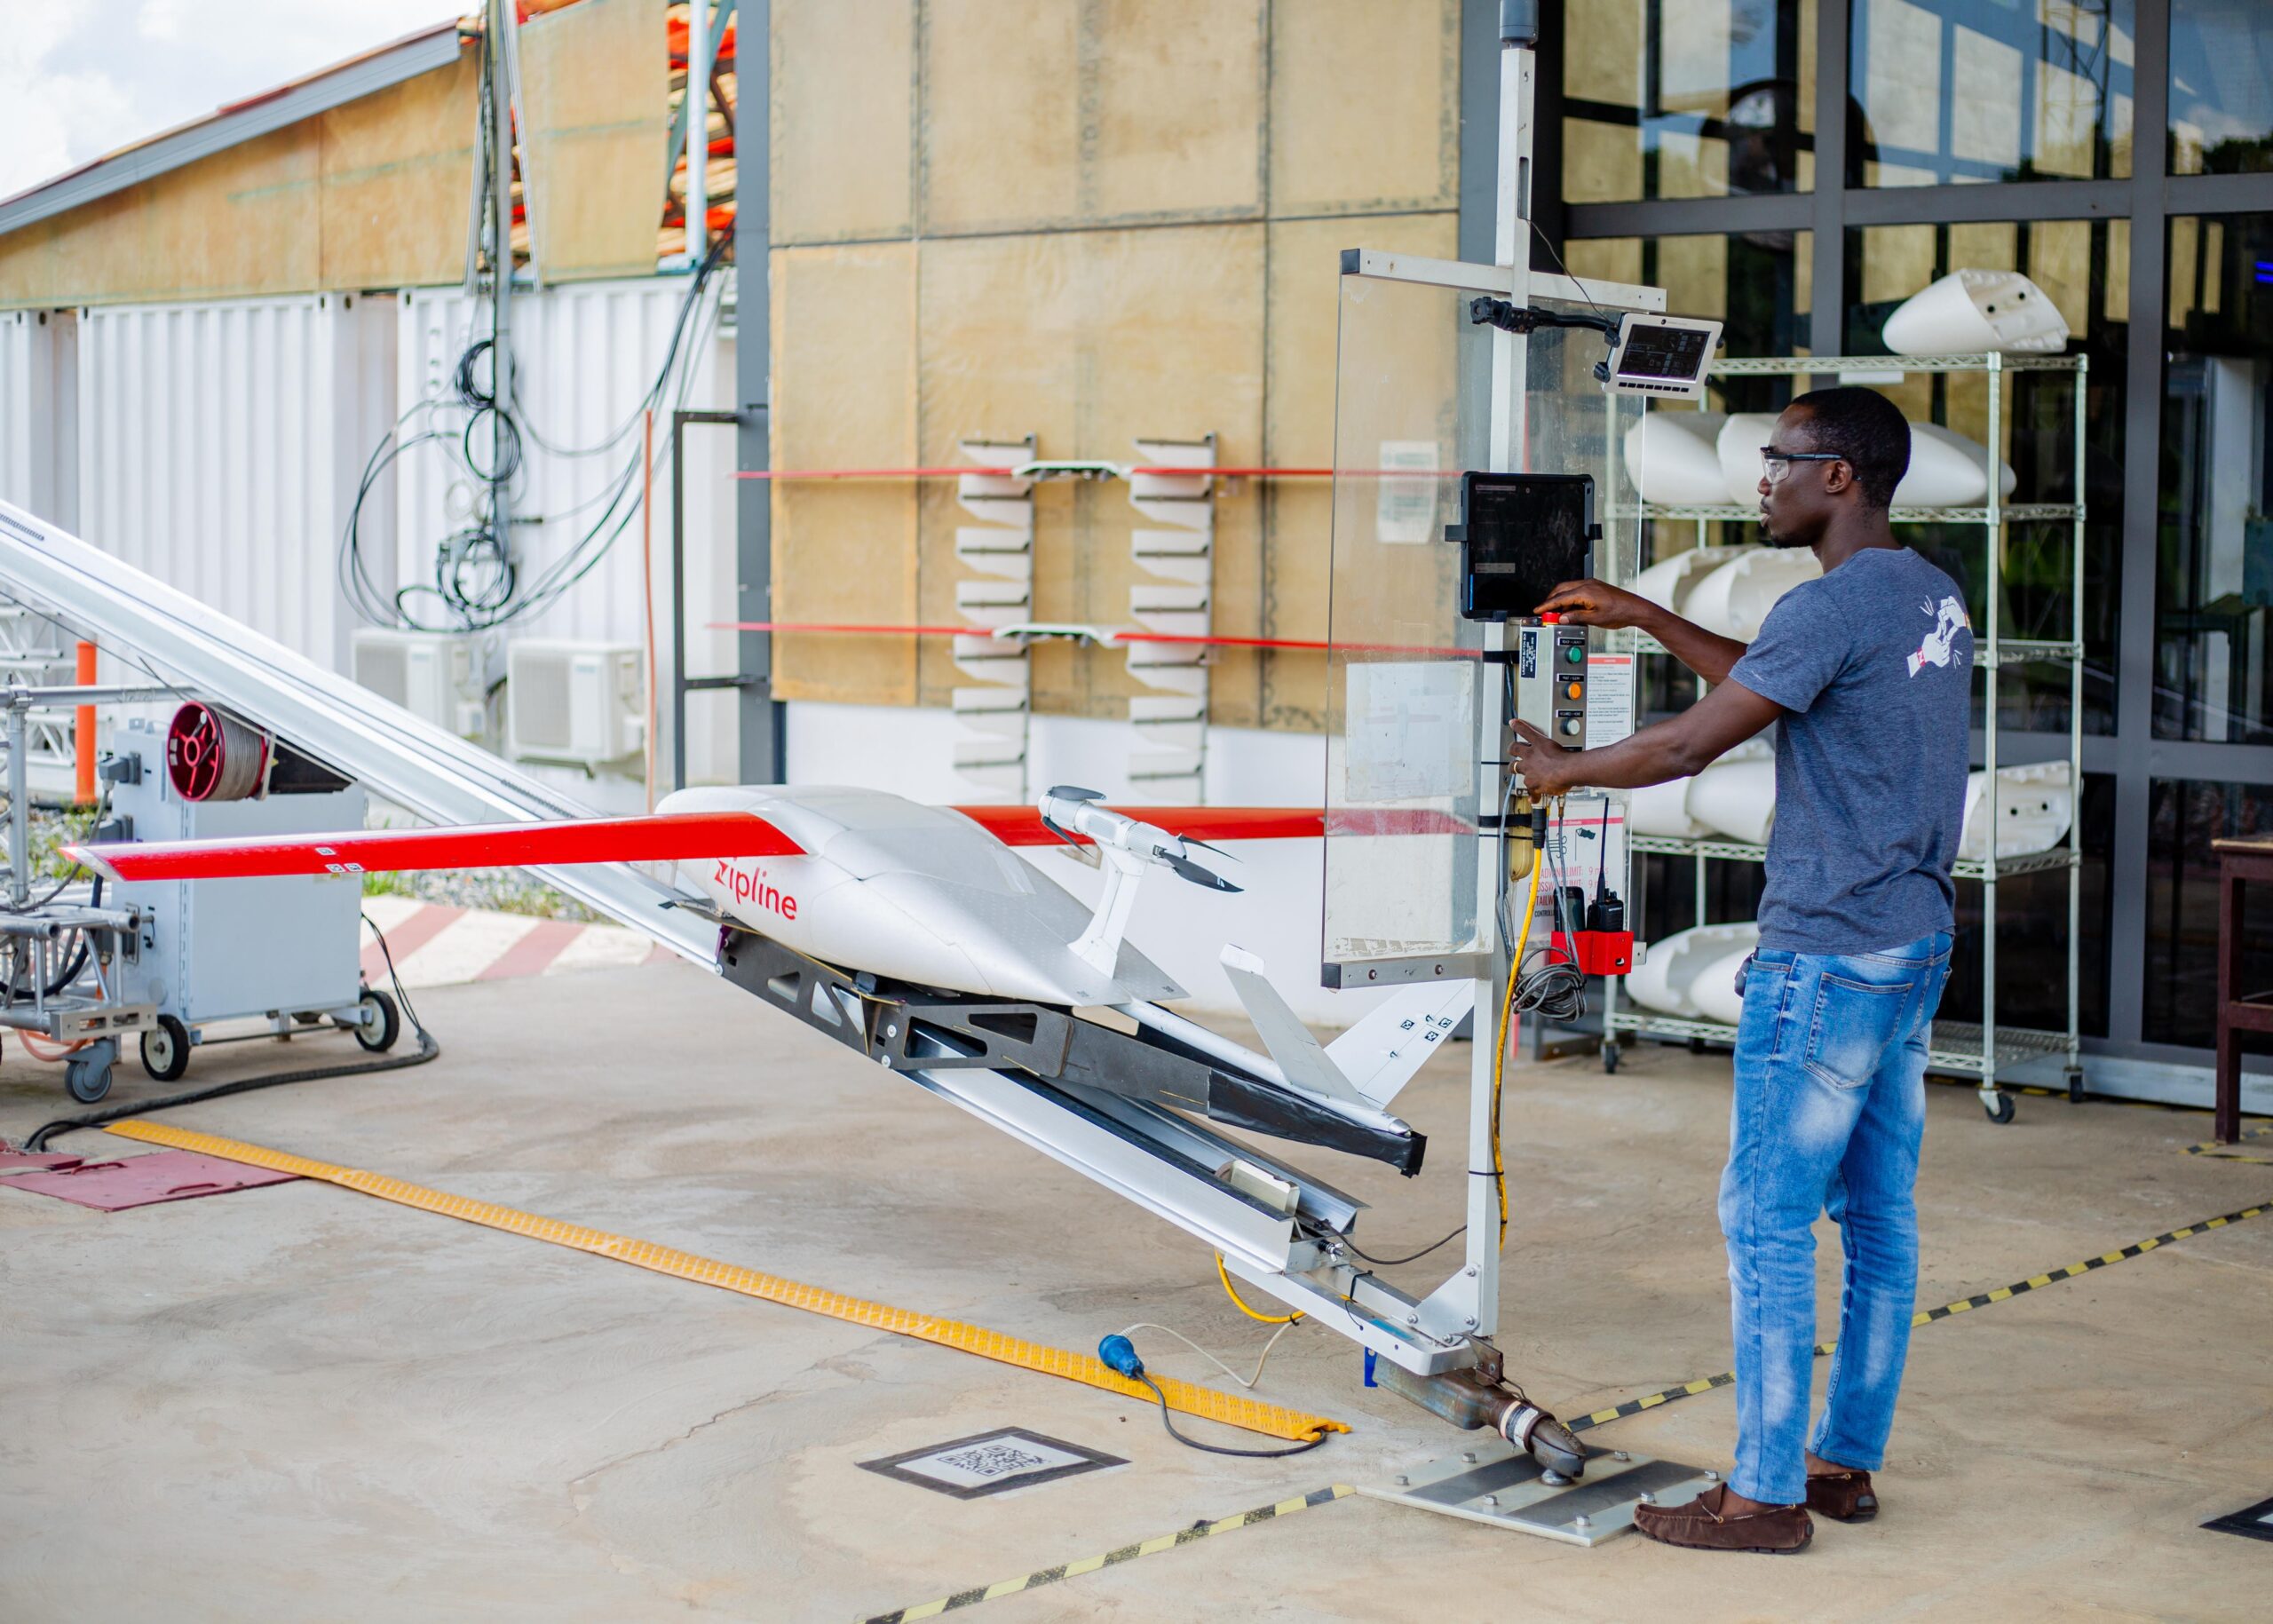 Zipline and Jumia Join Forces to Pioneer Drone Delivery Across Africa